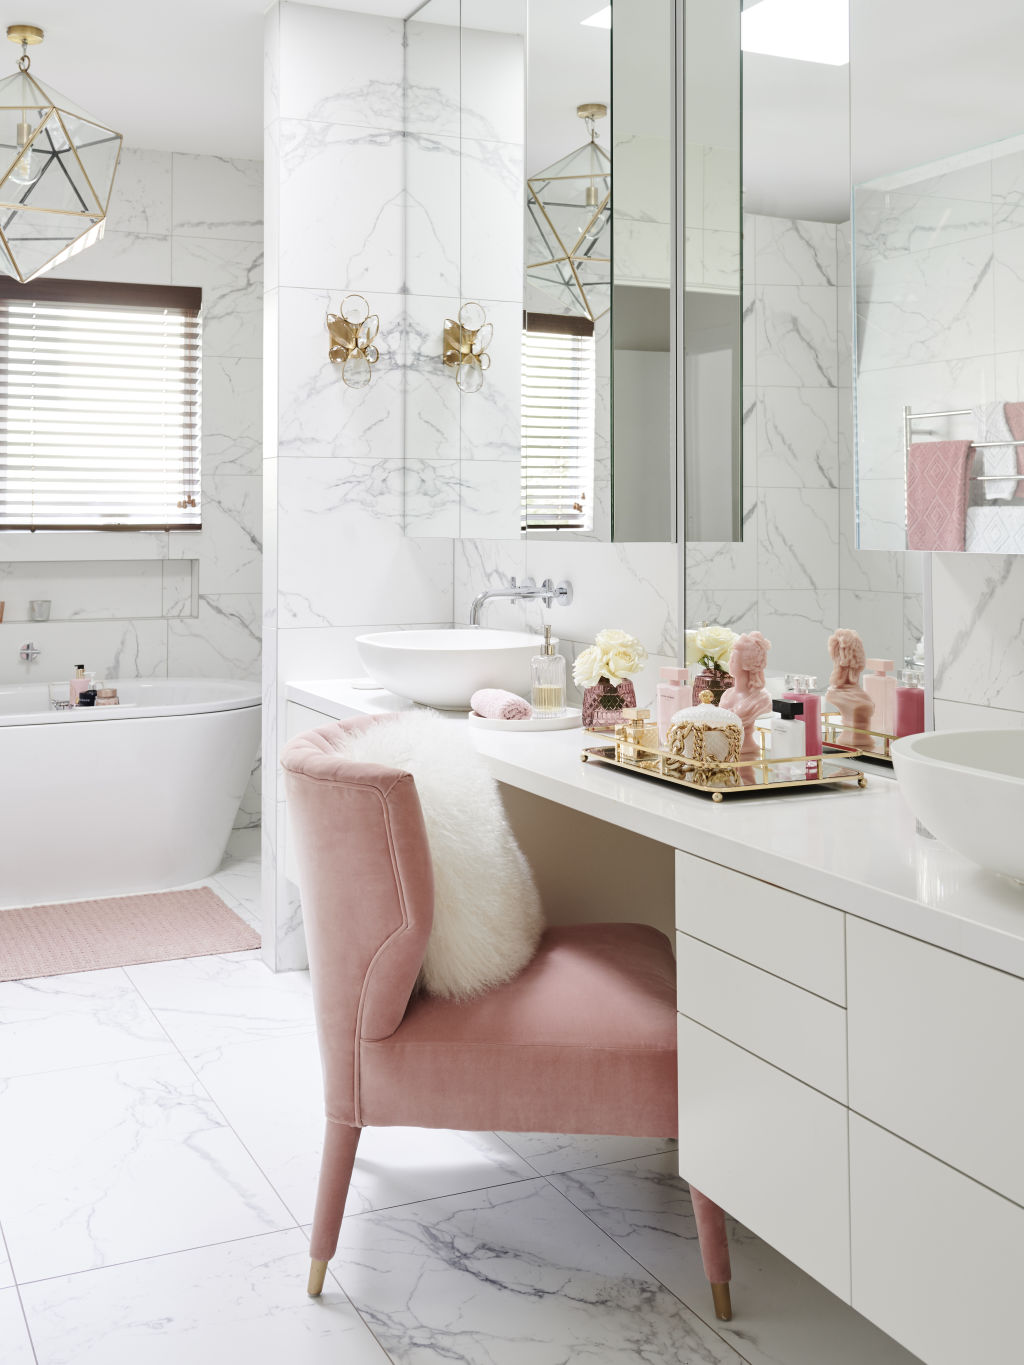 'Gone are the days where the bathroom was just a practical room,' says interior stylist Tina Nettlefold. Photo: T.House